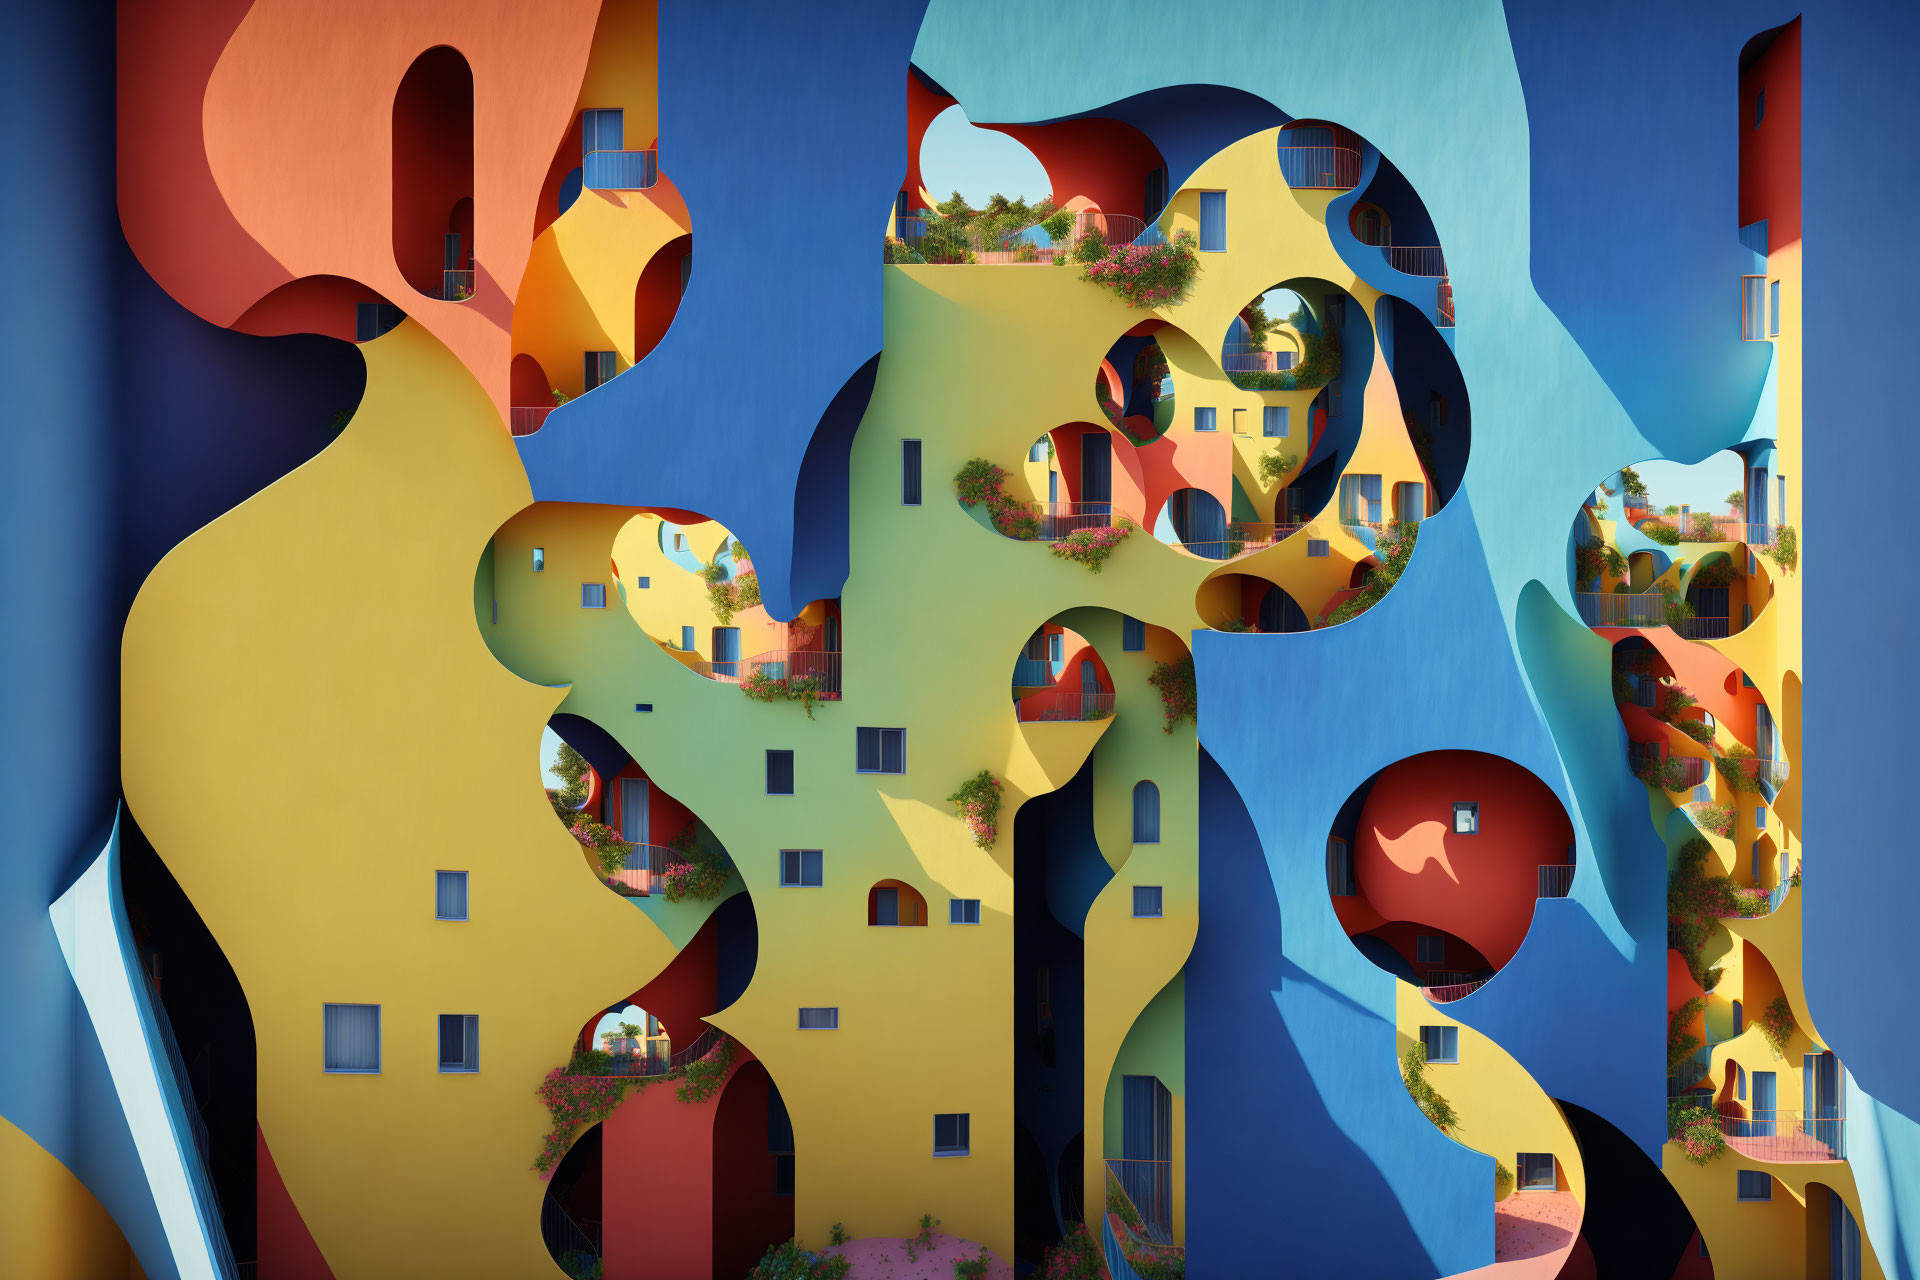 Colorful Abstract Shapes Featuring European-Style Village Landscape